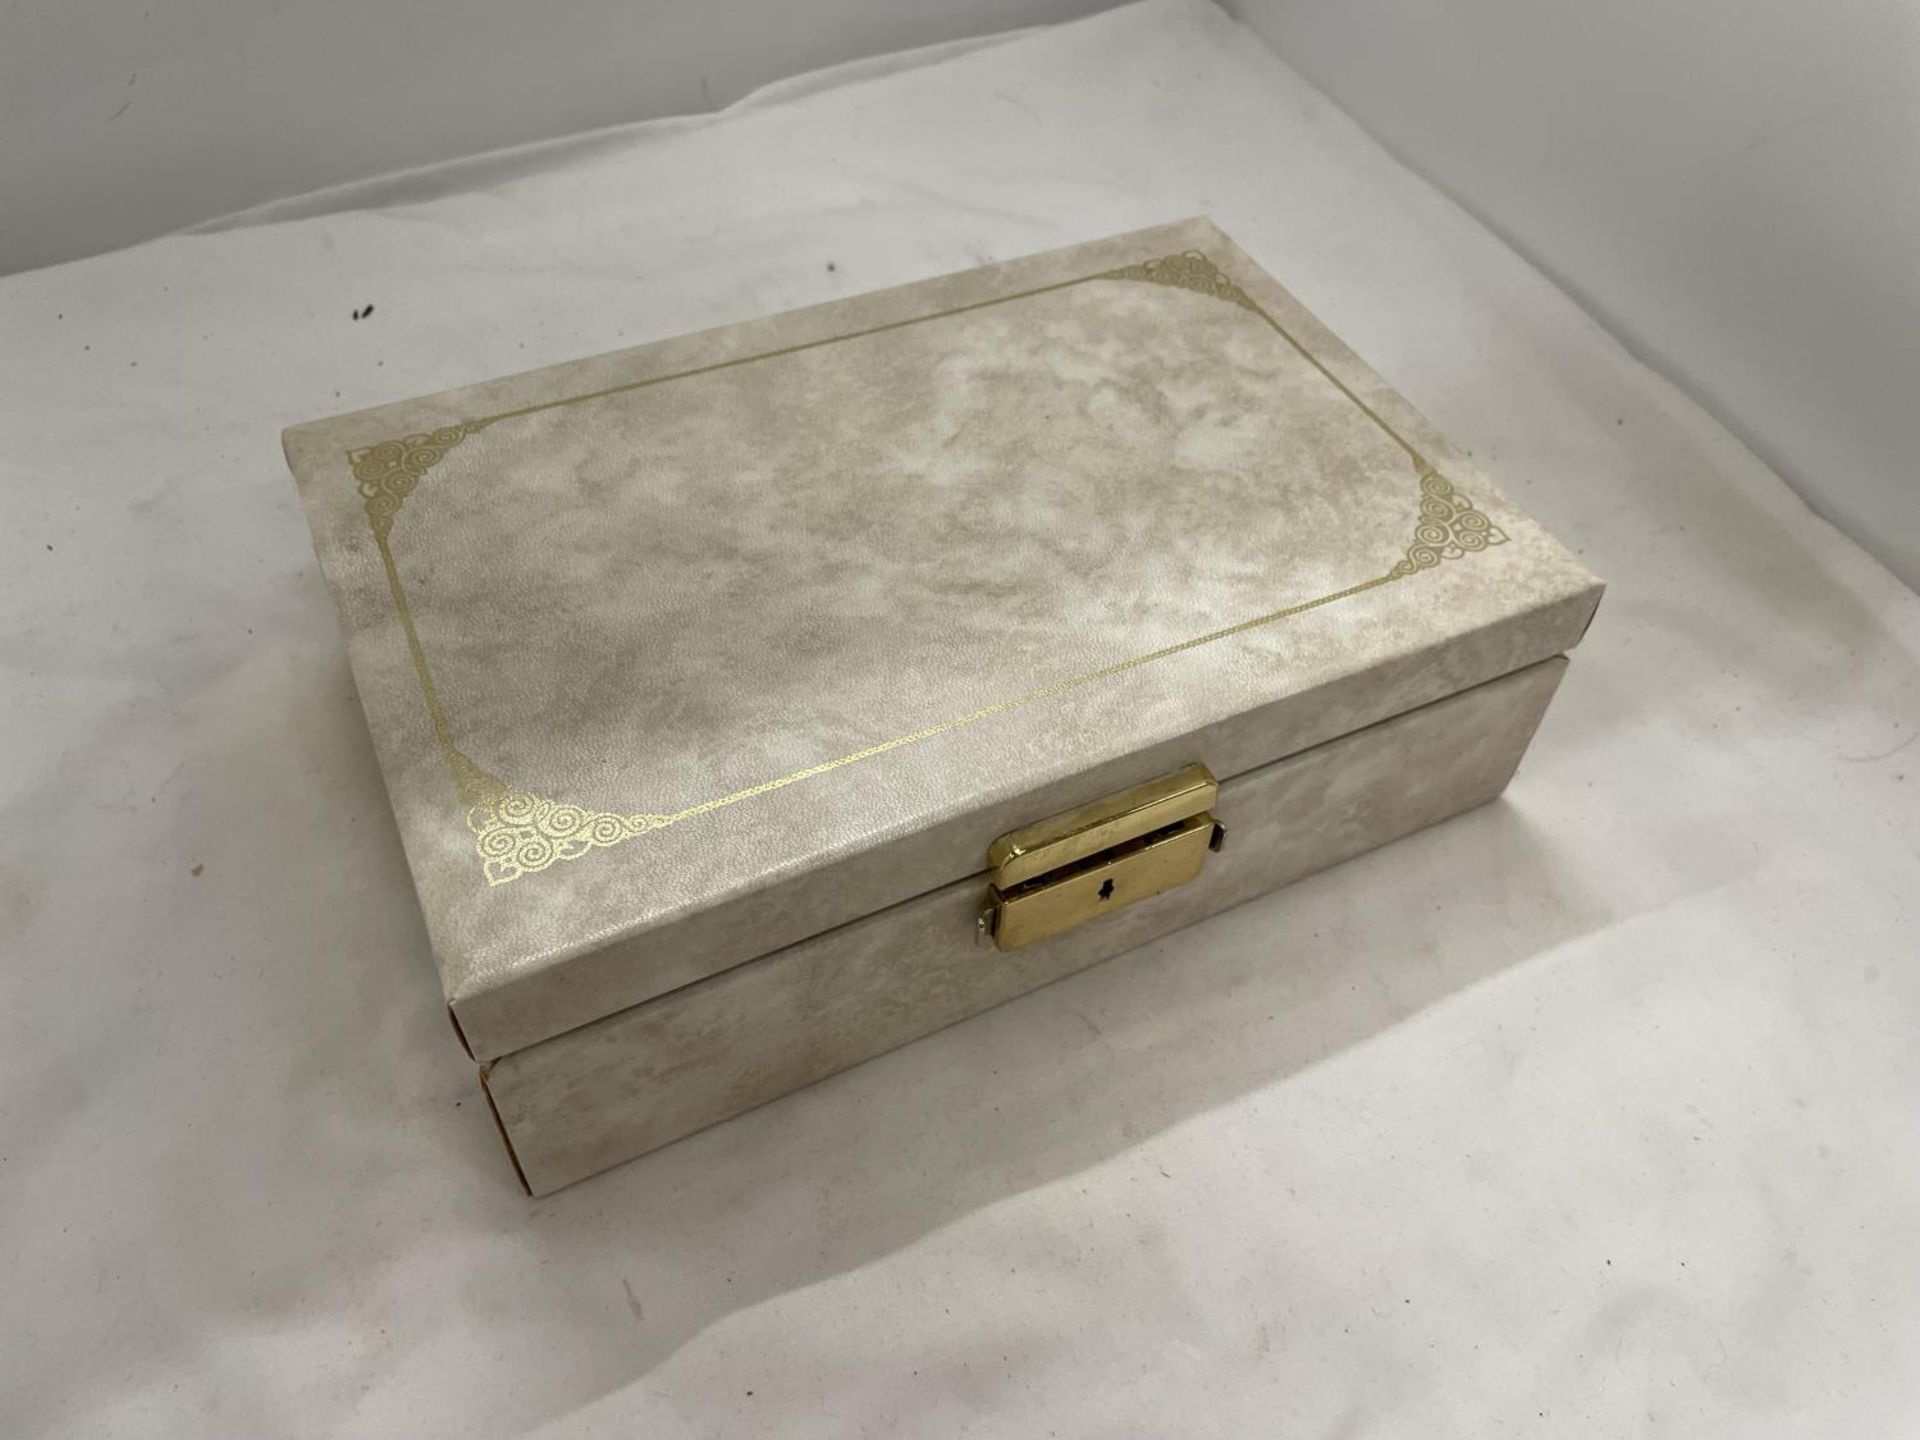 A JEWELLERY BOX CONTAINING WATCHES, BRACELETS, NECKLACES, EARRINGS, ETC - Image 8 of 8